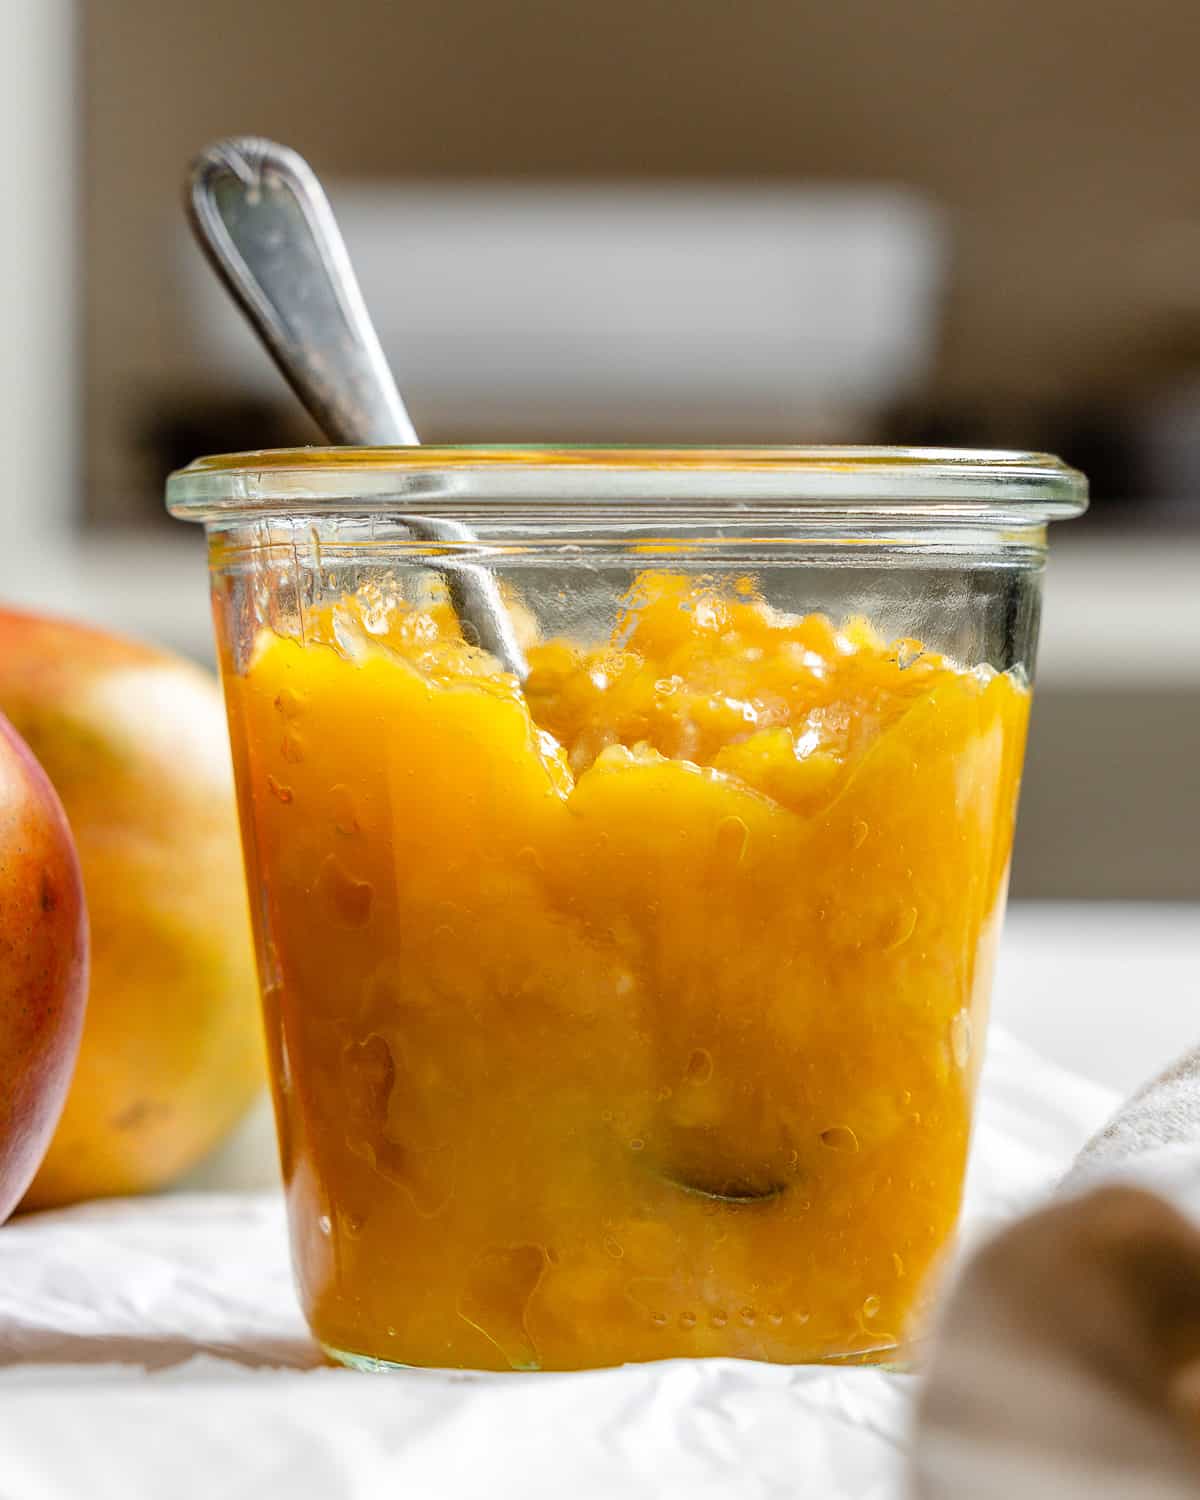 completed mango com،e in a jar a،nst a light background